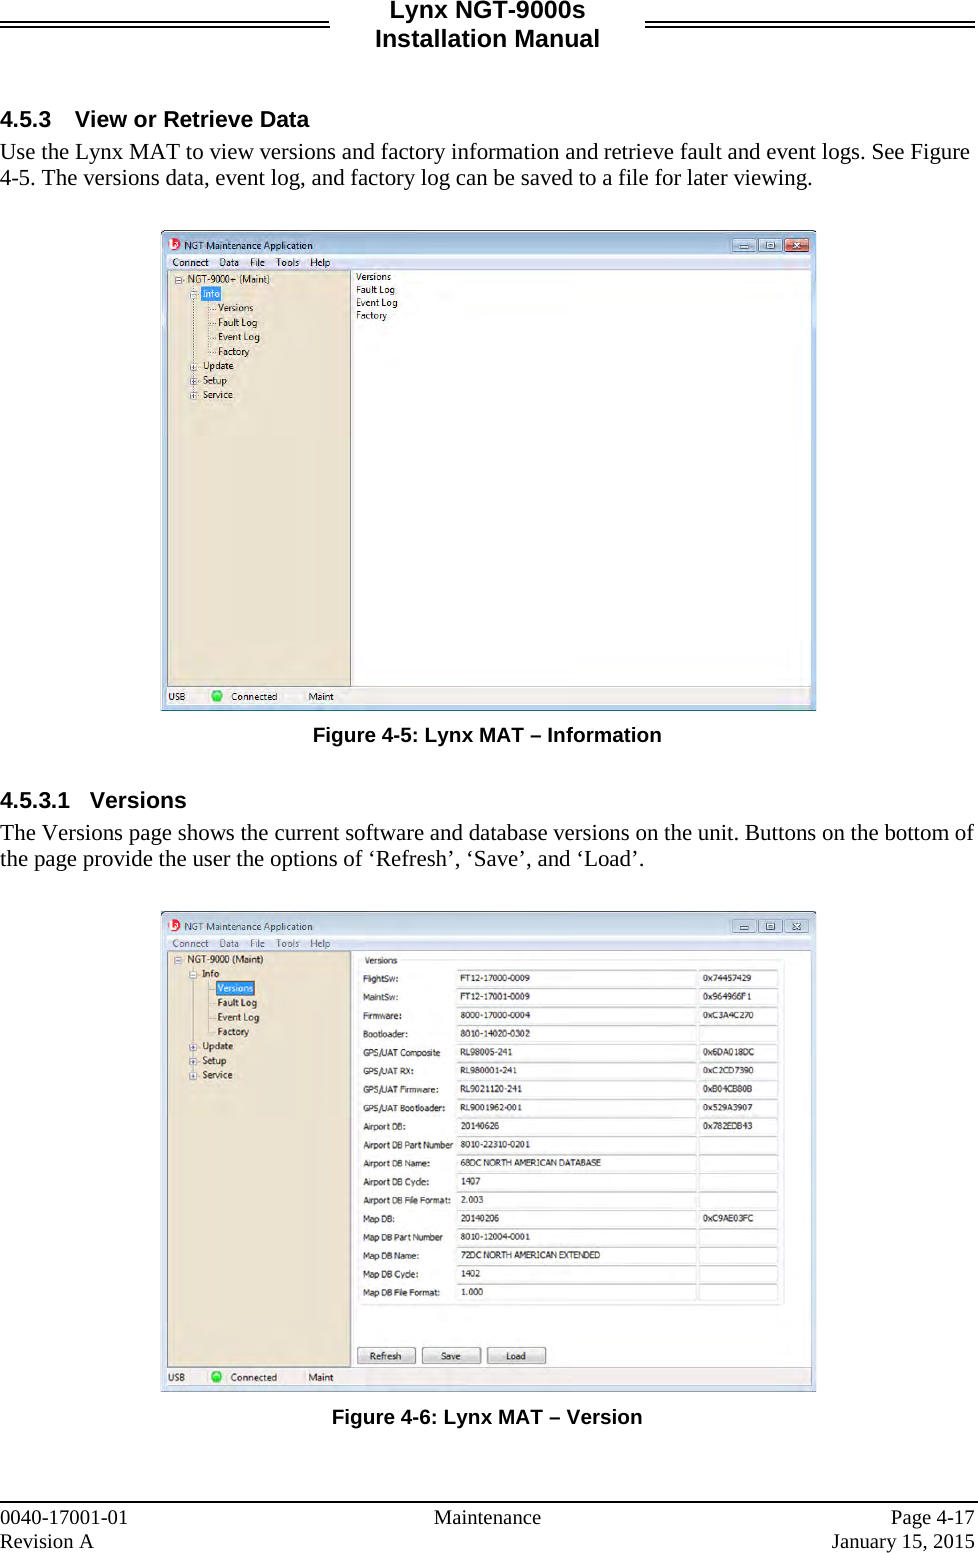 Lynx NGT-9000s Installation Manual   4.5.3 View or Retrieve Data Use the Lynx MAT to view versions and factory information and retrieve fault and event logs. See Figure 4-5. The versions data, event log, and factory log can be saved to a file for later viewing.    Figure 4-5: Lynx MAT – Information  4.5.3.1 Versions The Versions page shows the current software and database versions on the unit. Buttons on the bottom of the page provide the user the options of ‘Refresh’, ‘Save’, and ‘Load’.    Figure 4-6: Lynx MAT – Version   0040-17001-01    Maintenance  Page 4-17 Revision A    January 15, 2015 